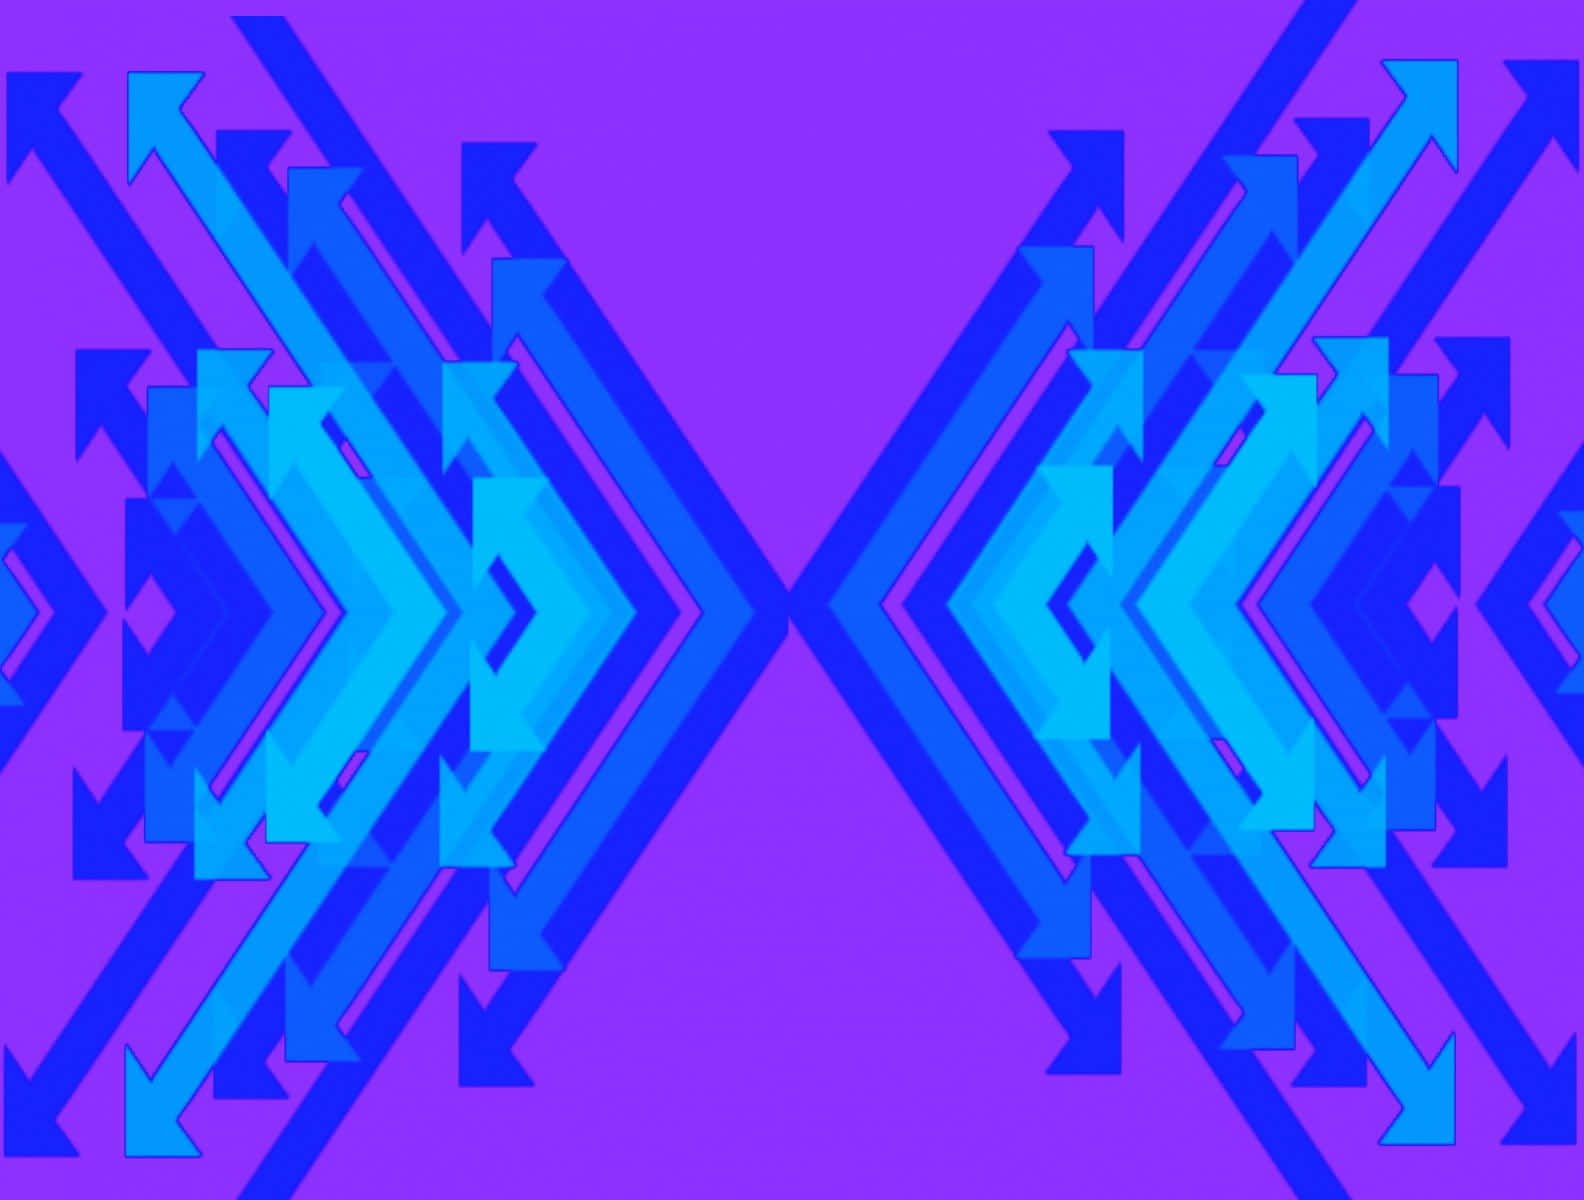 A Blue And Purple Abstract Pattern With Arrows